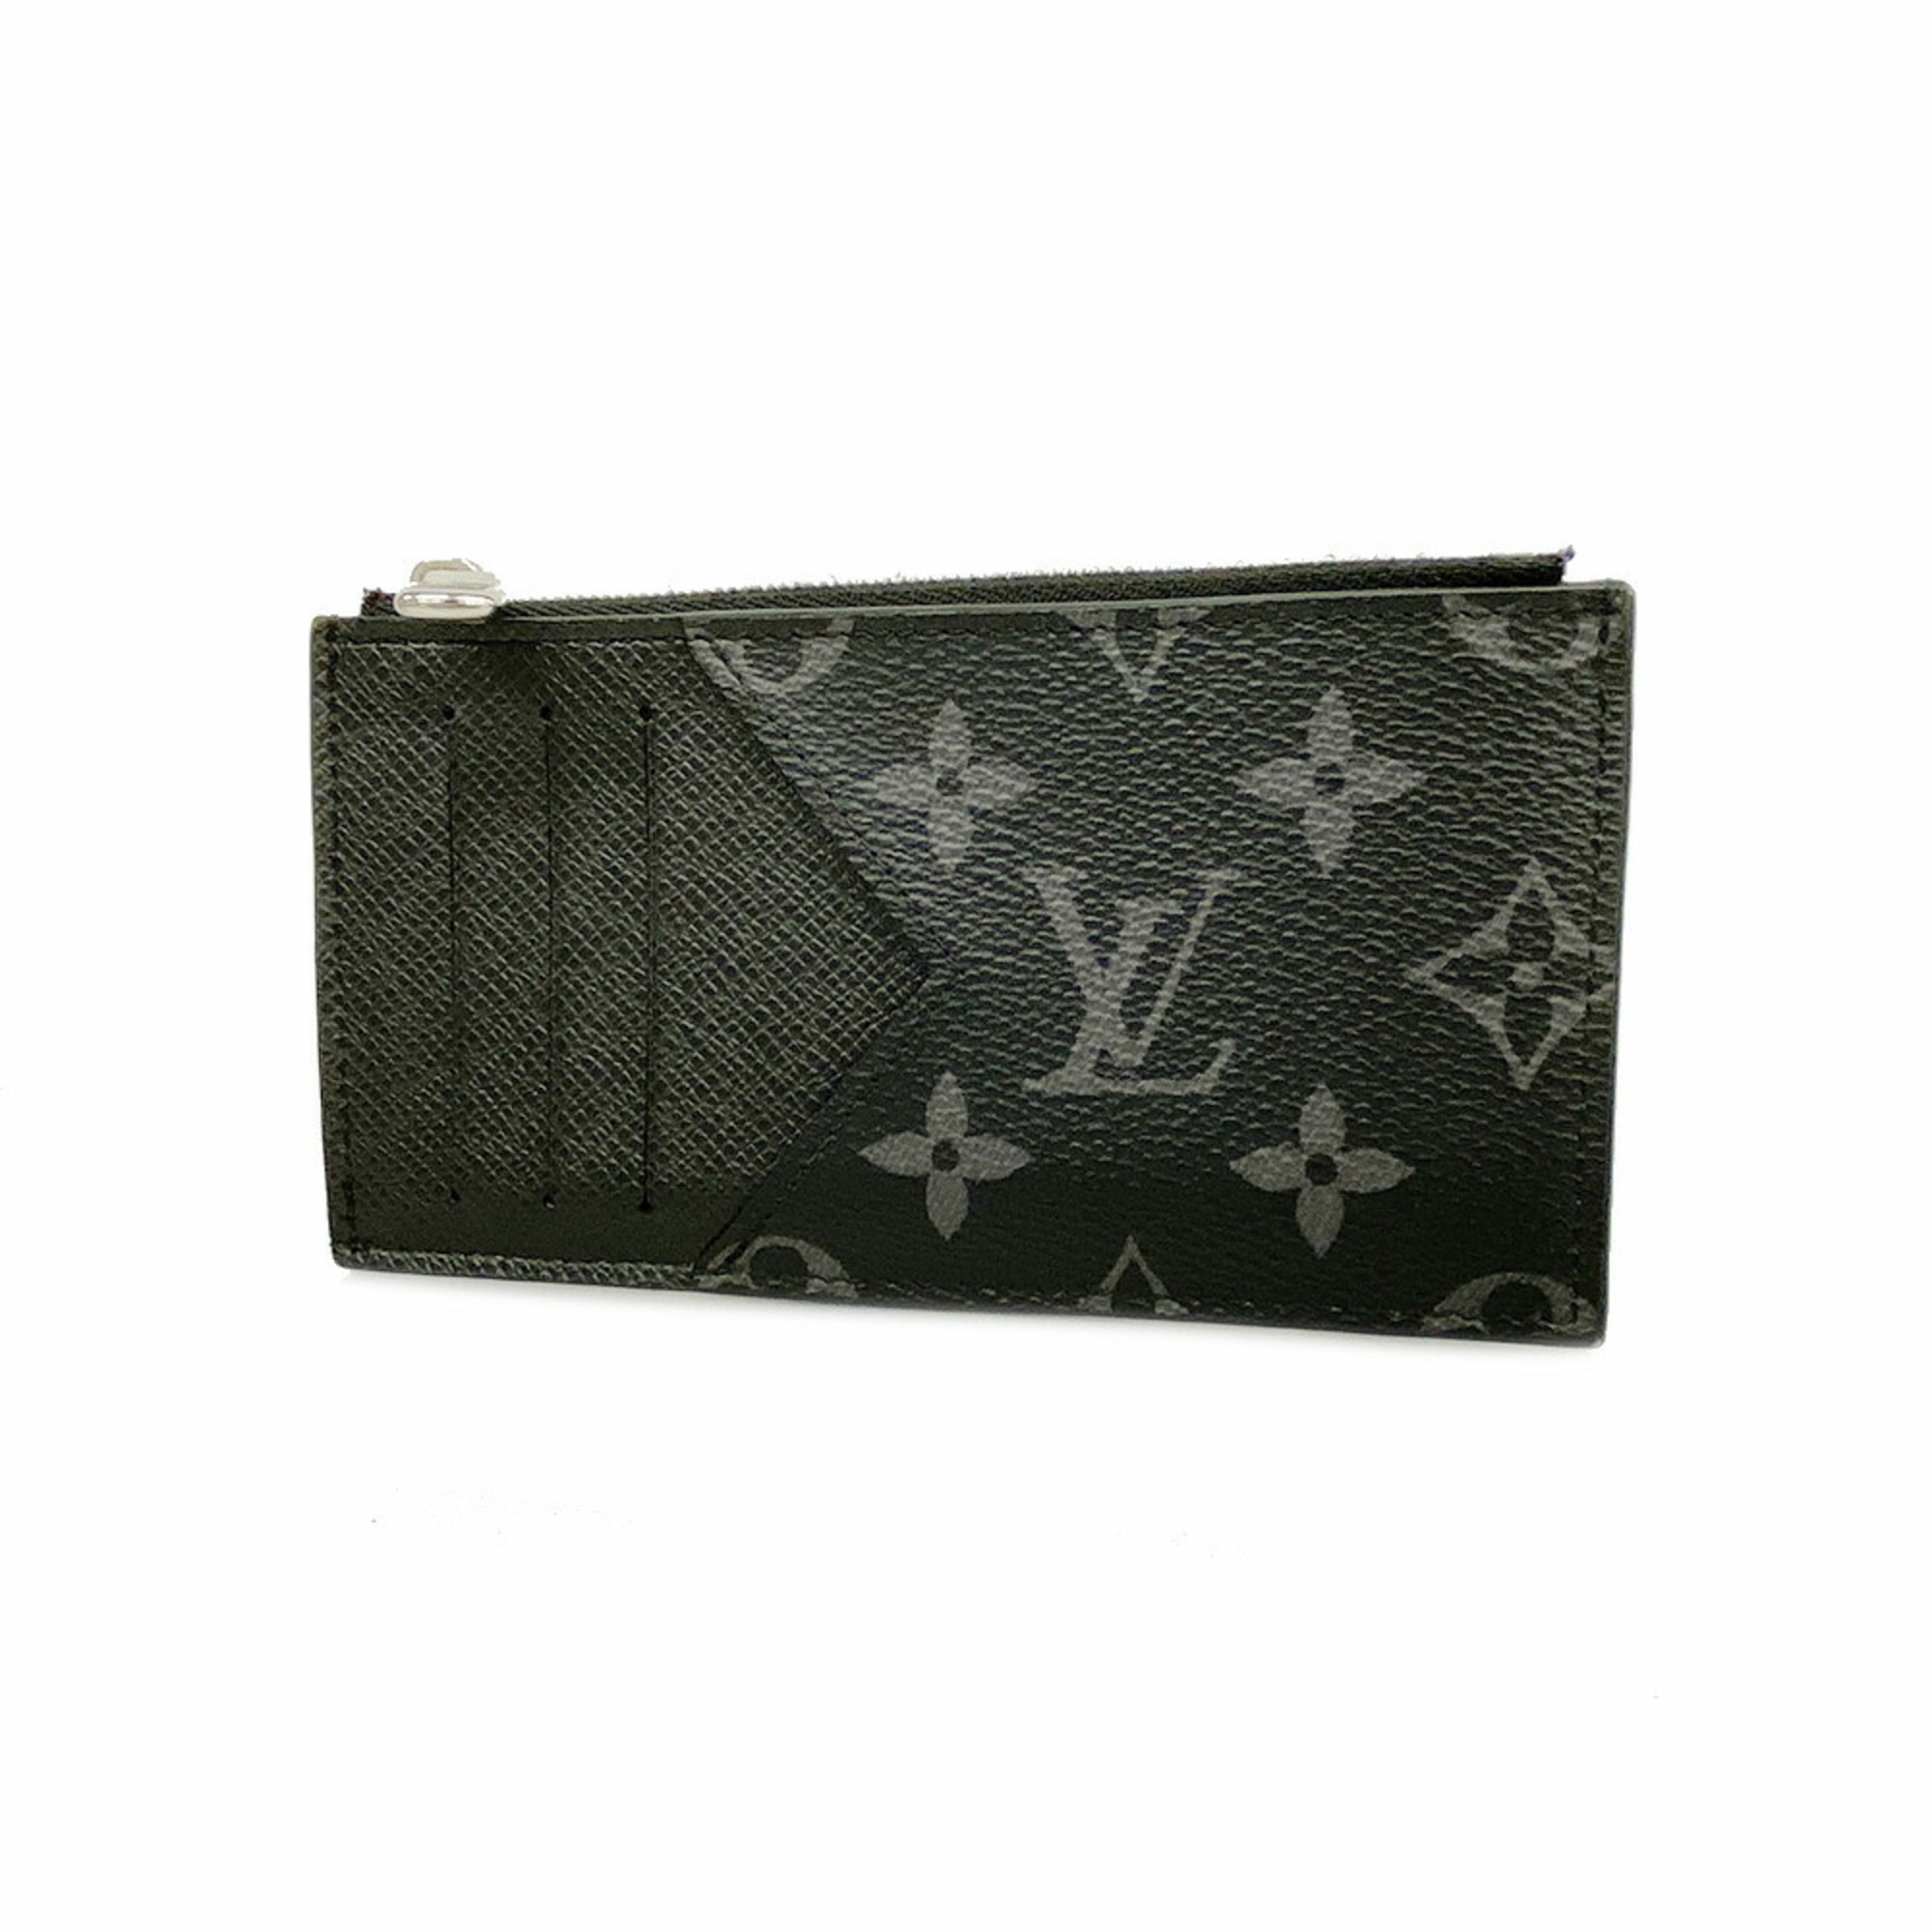 LOUIS VUITTON ルイヴィトン 財布・コインケース - 黒(チェック)